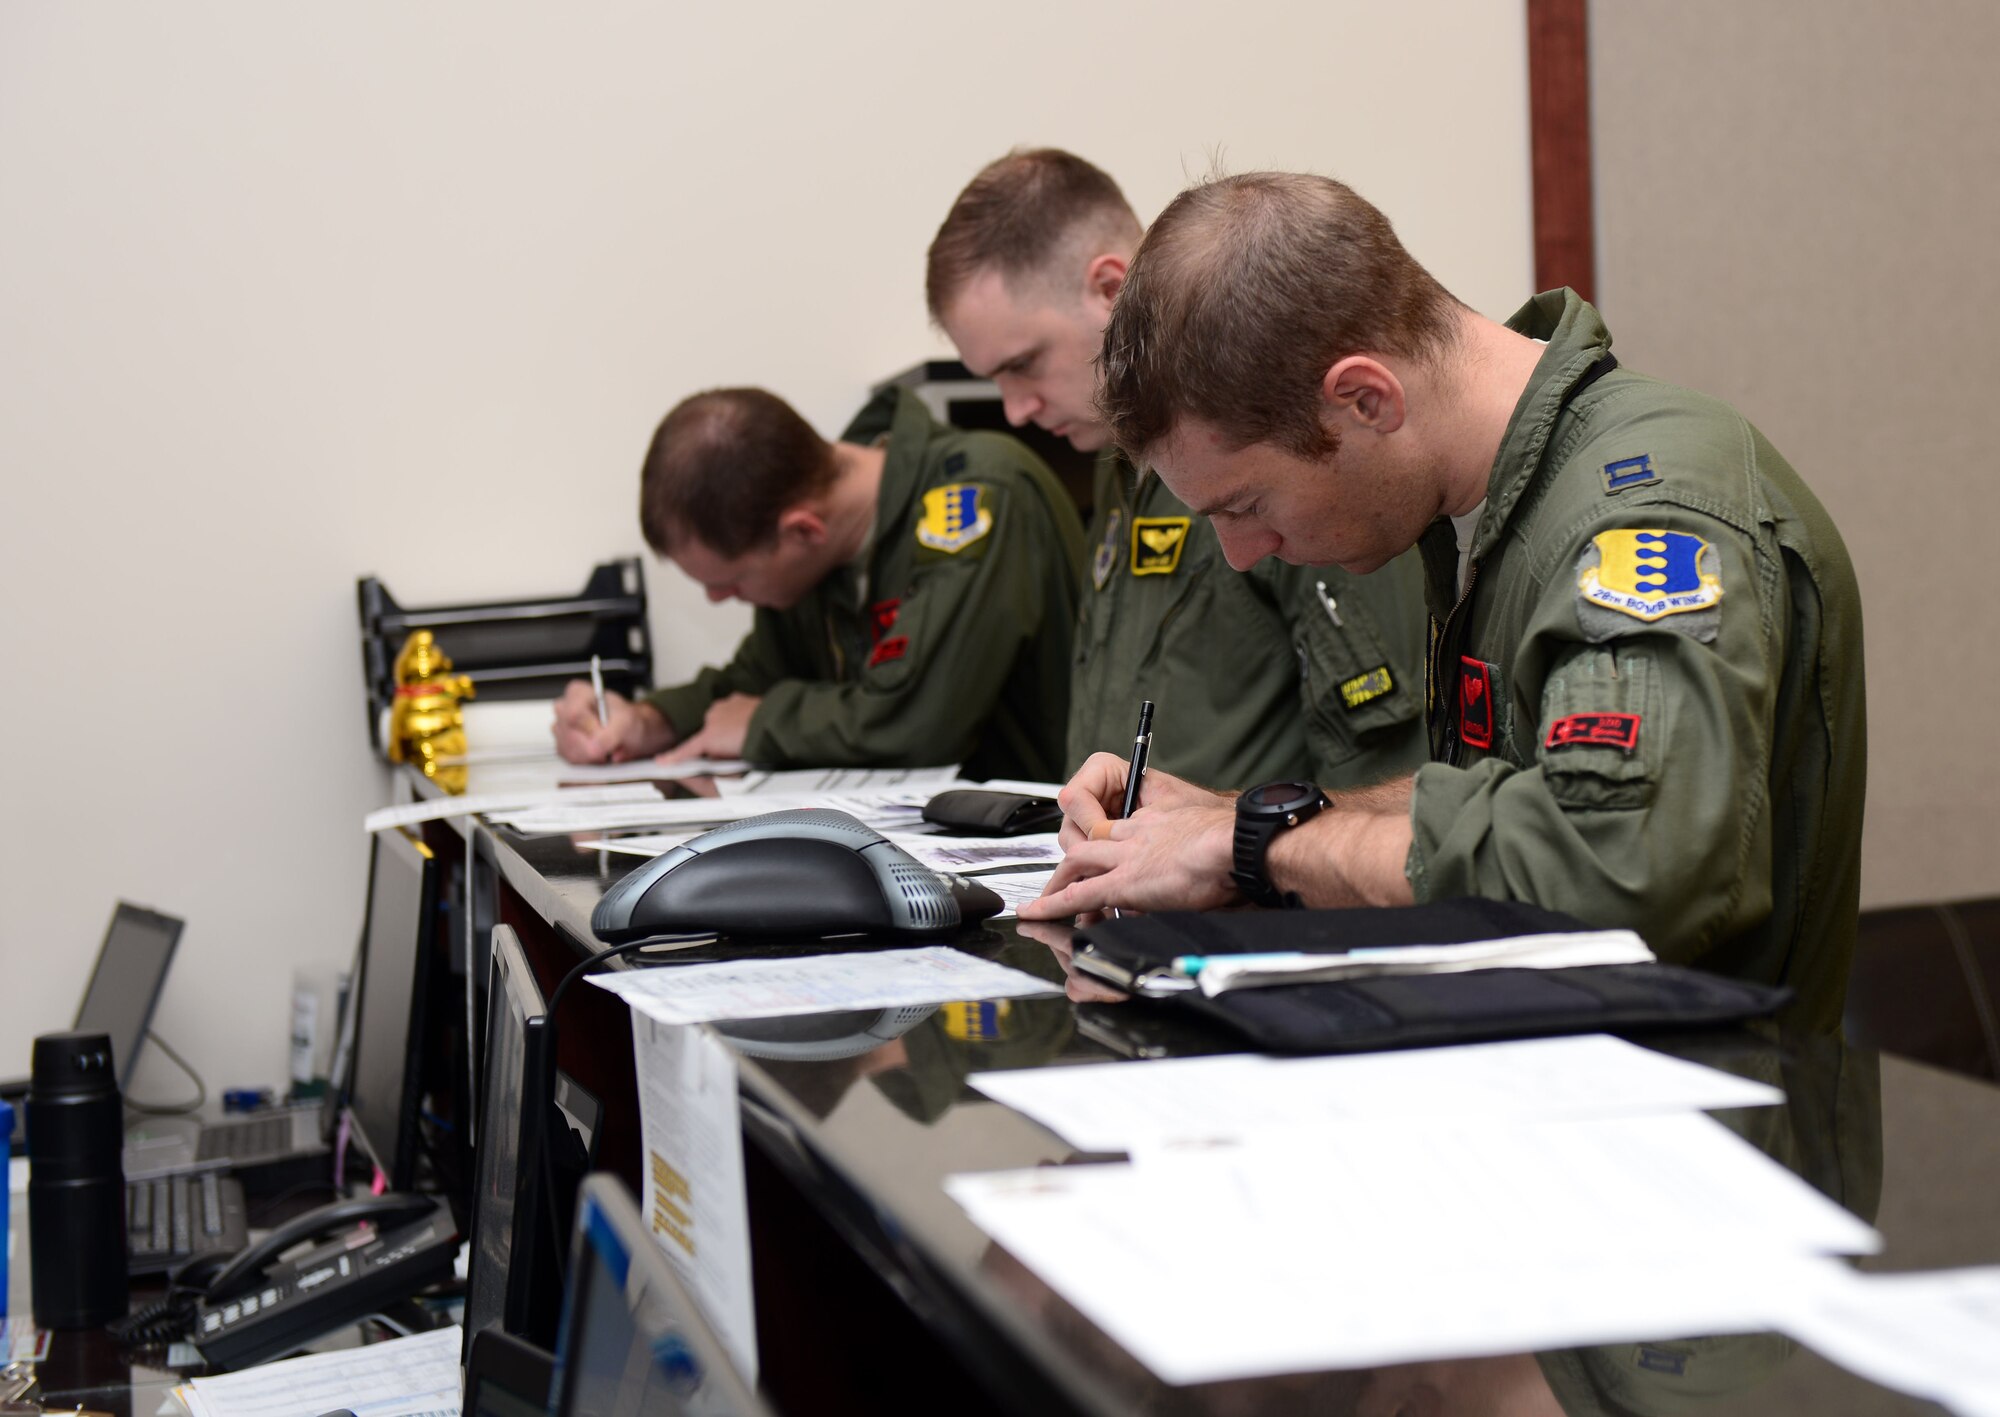 Pilots and weapon systems officers assigned to the 34th and 37th Bomb Squadrons, attend a step brief during the Combat Hammer exercise at Ellsworth Air Force Base, S.D., May 10, 2017. Combat Hammer is designed to assess and evaluate the reliability, maintainability, suitability and accuracy of precision-guided air-to-ground munitions. (U.S. Air Force photo by Airman 1st Class Donald C. Knechtel)